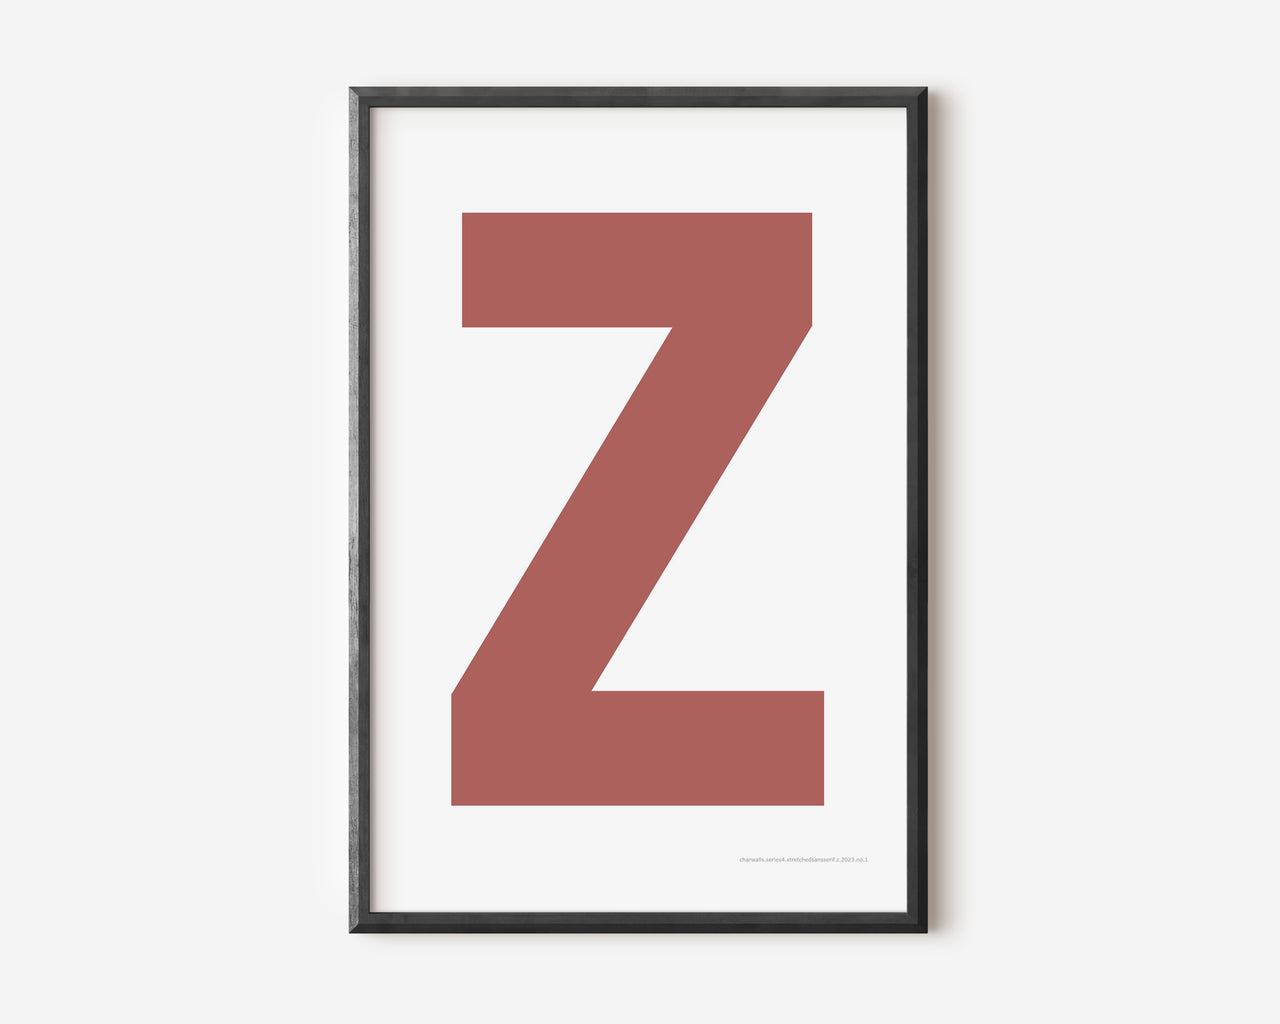 Modern art print with an uppercase Nantucket red letter Z on a white background.